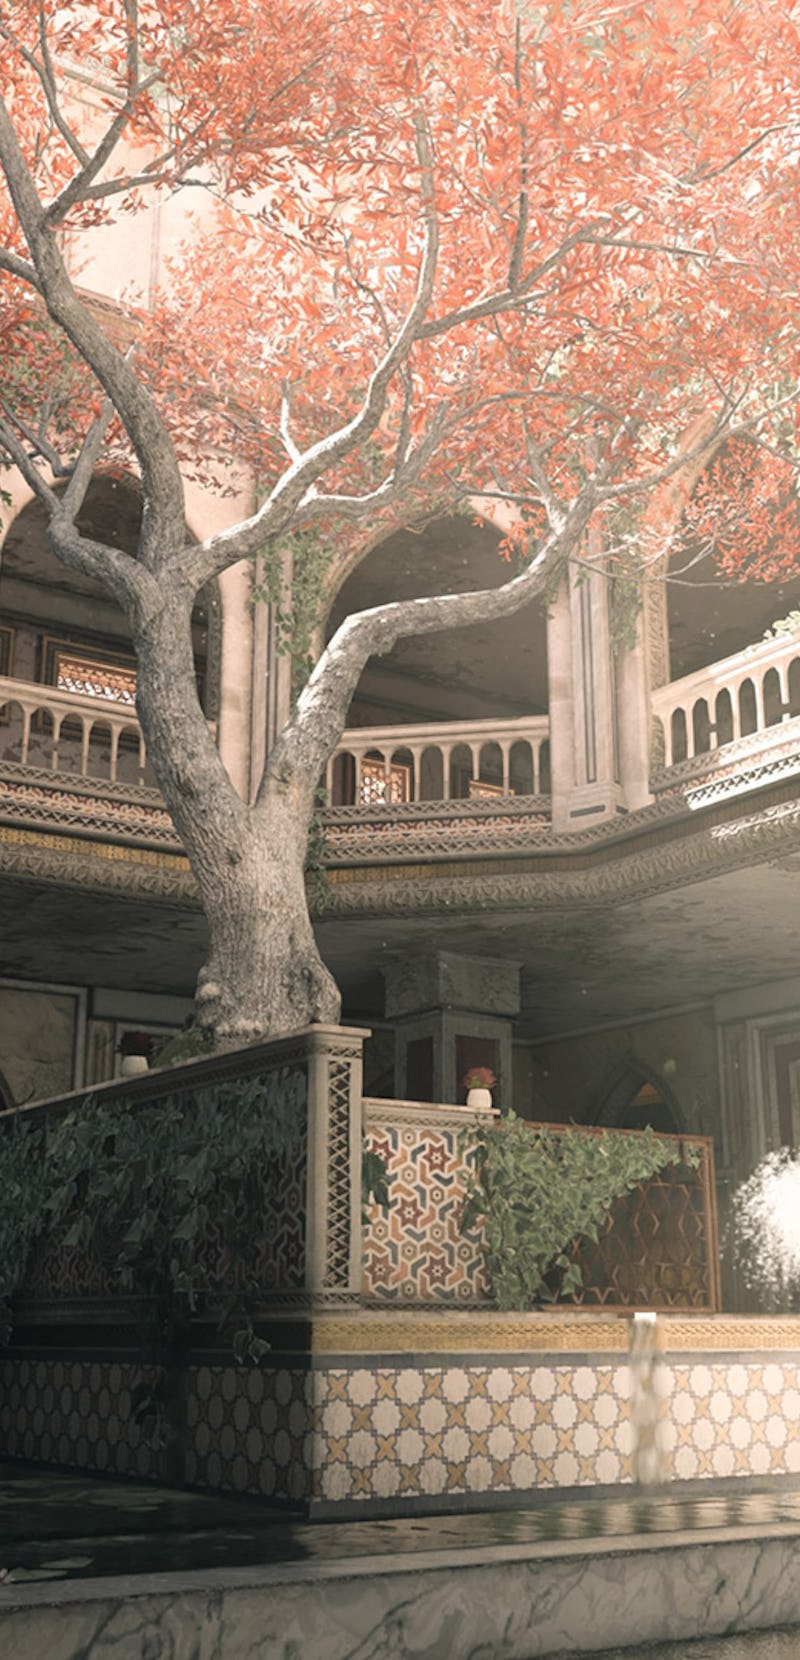 A still from a video landscape of a building and a tree in 'Call of Duty Modern Warfare'